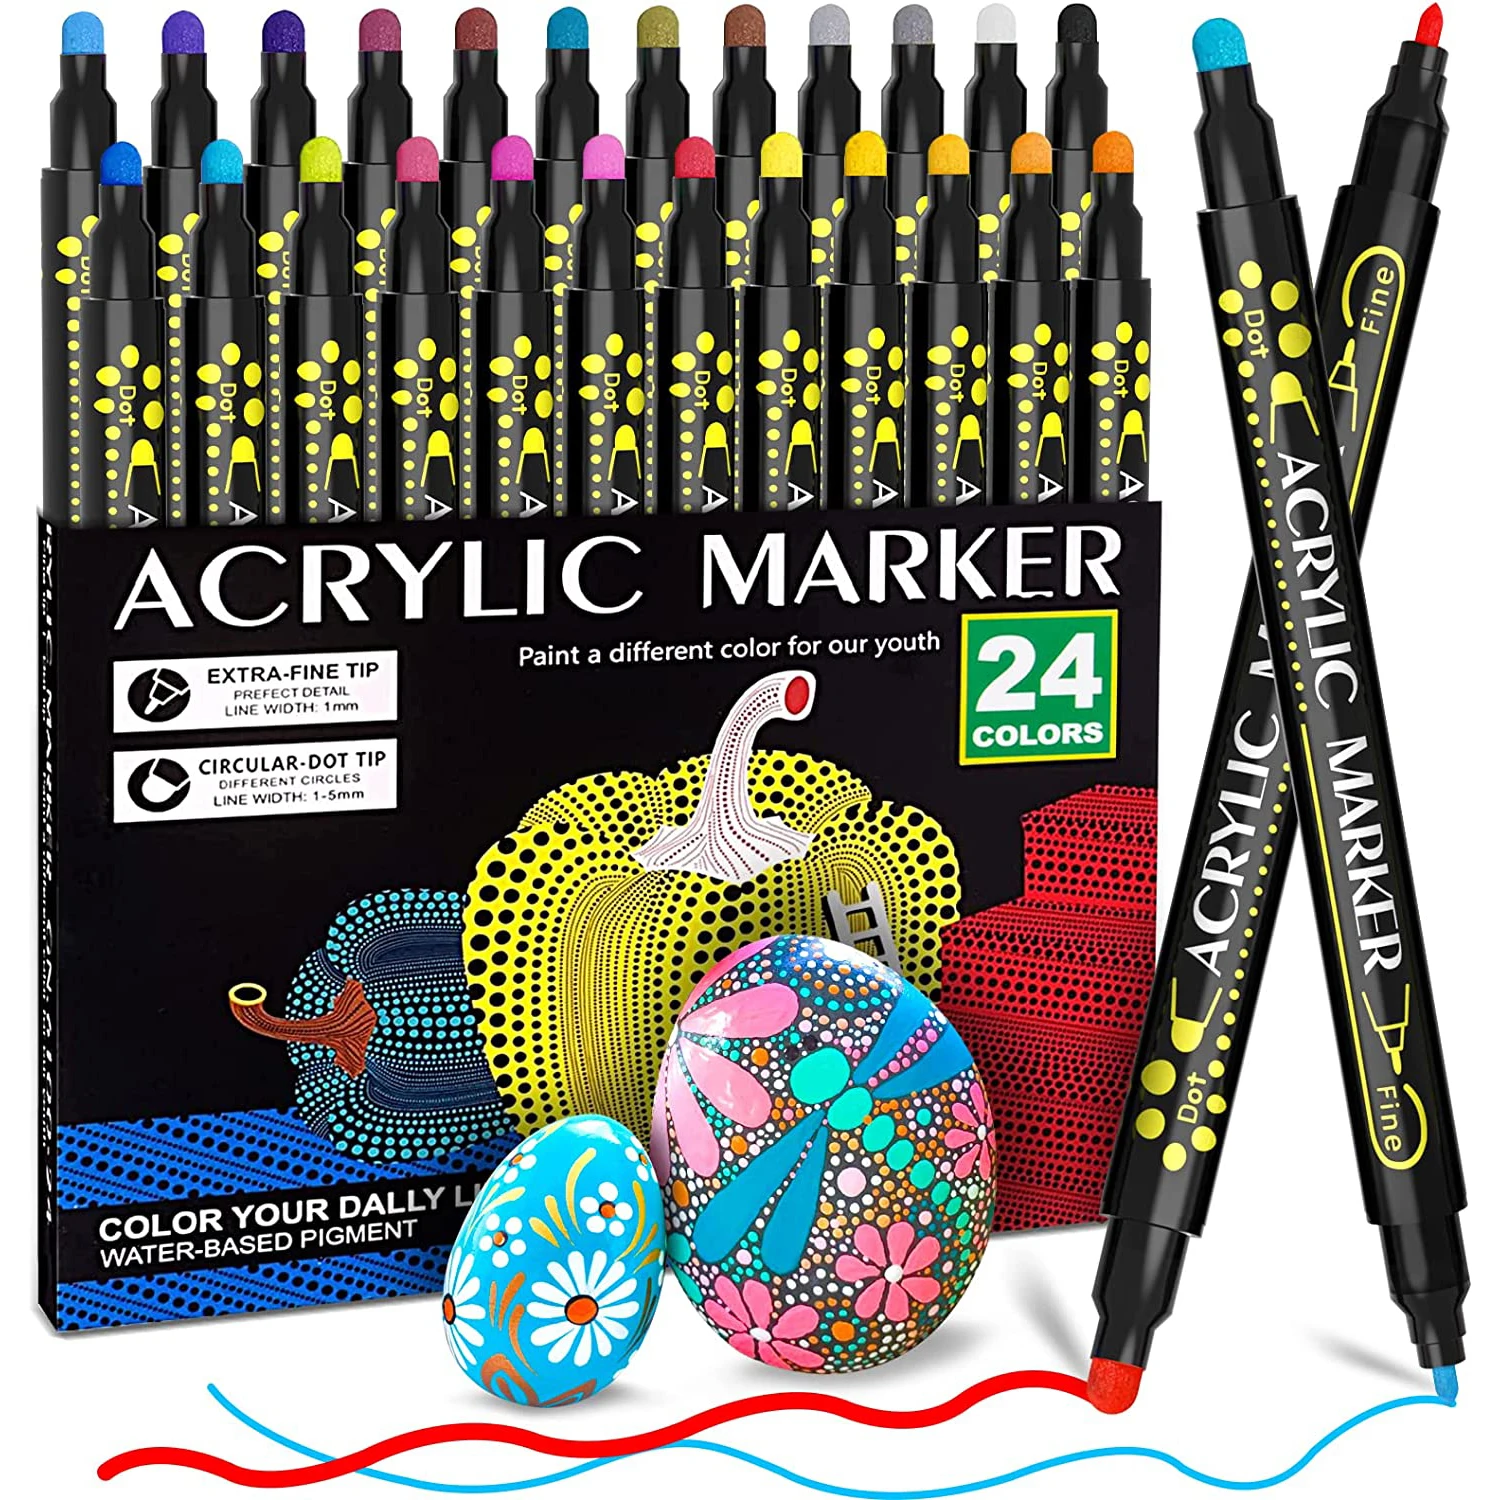 36 Colors Acrylic Paint Markers,brush Tip And Fine Tip (dual Tip) Paint  Markers, Paint Pen For Rock